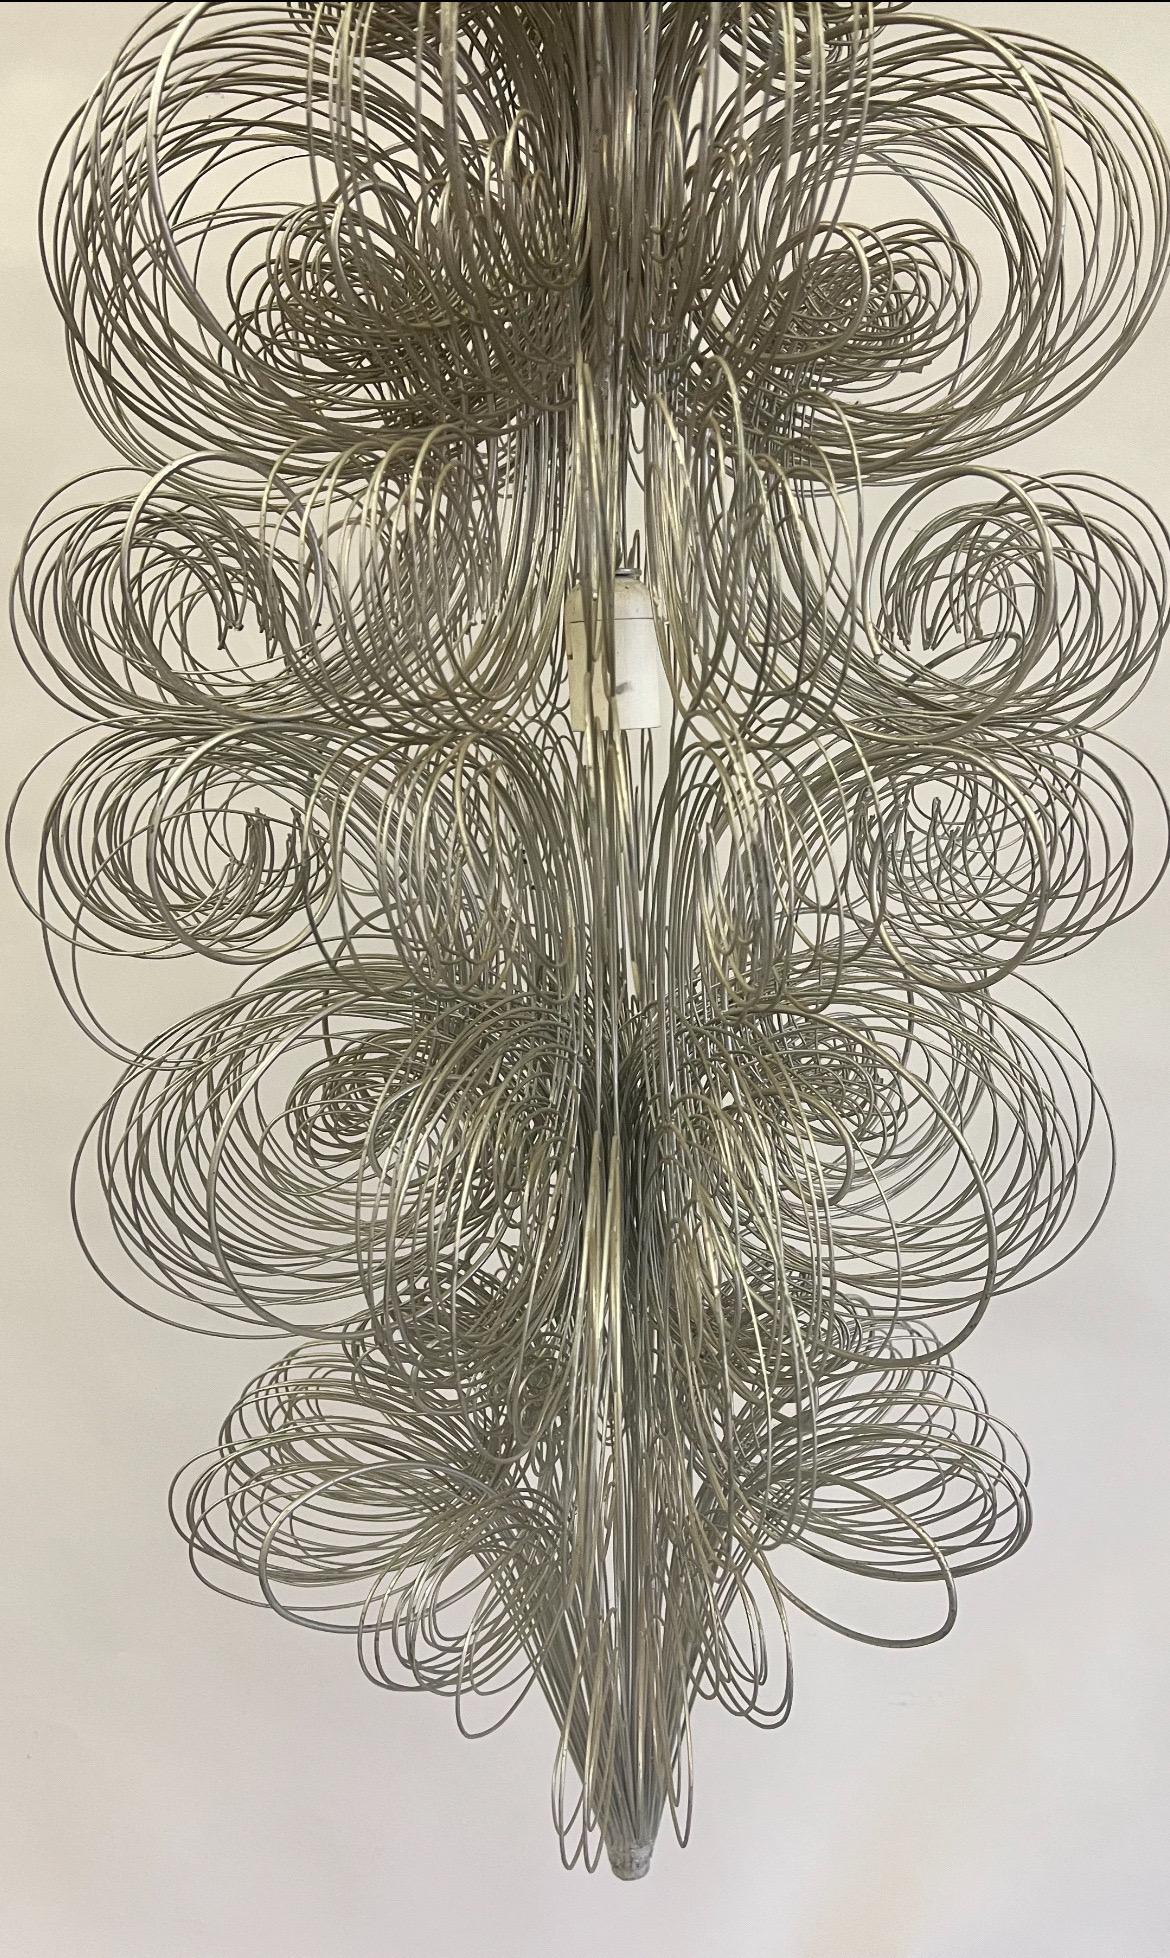 2 Rare, Original Artist Made Hanging Lighted Sculptures / Chandeliers / Pendants in the style of Jannis Kounellis, Italy, circa 1970.  Priced and Sold as Individual Pieces. These unique Italian Mid-Century Modern pieces are composed of steel wire,